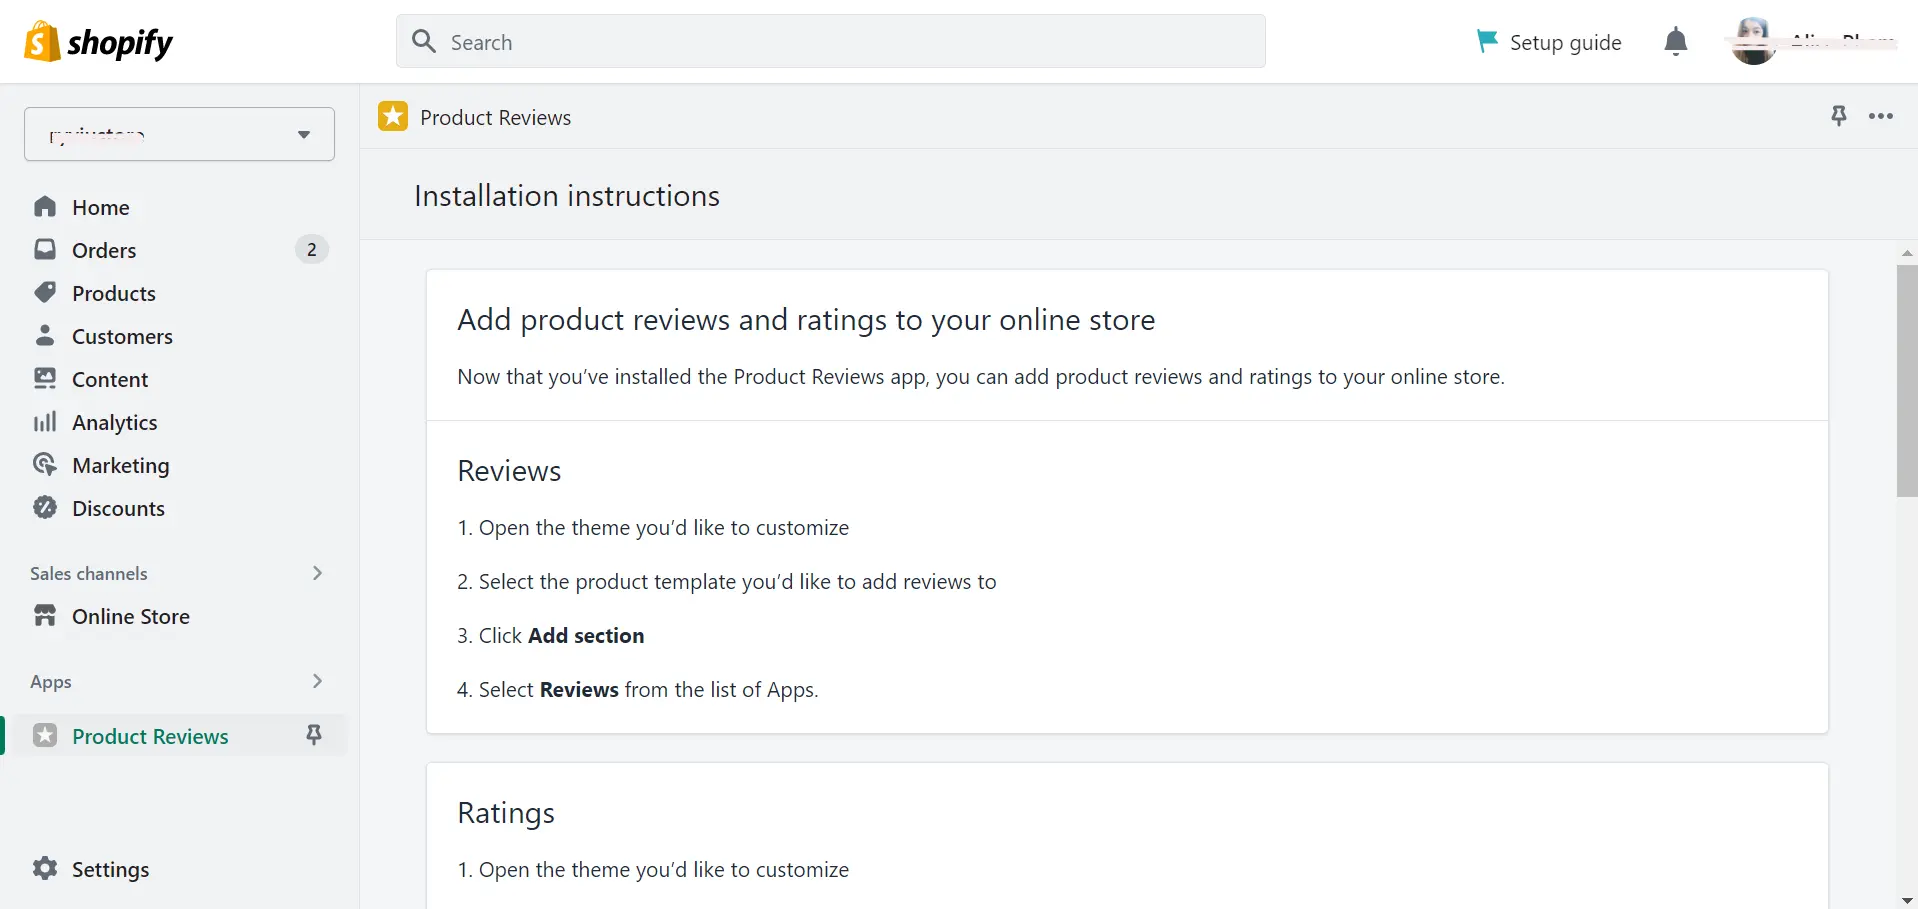 how to add reviews on shopify